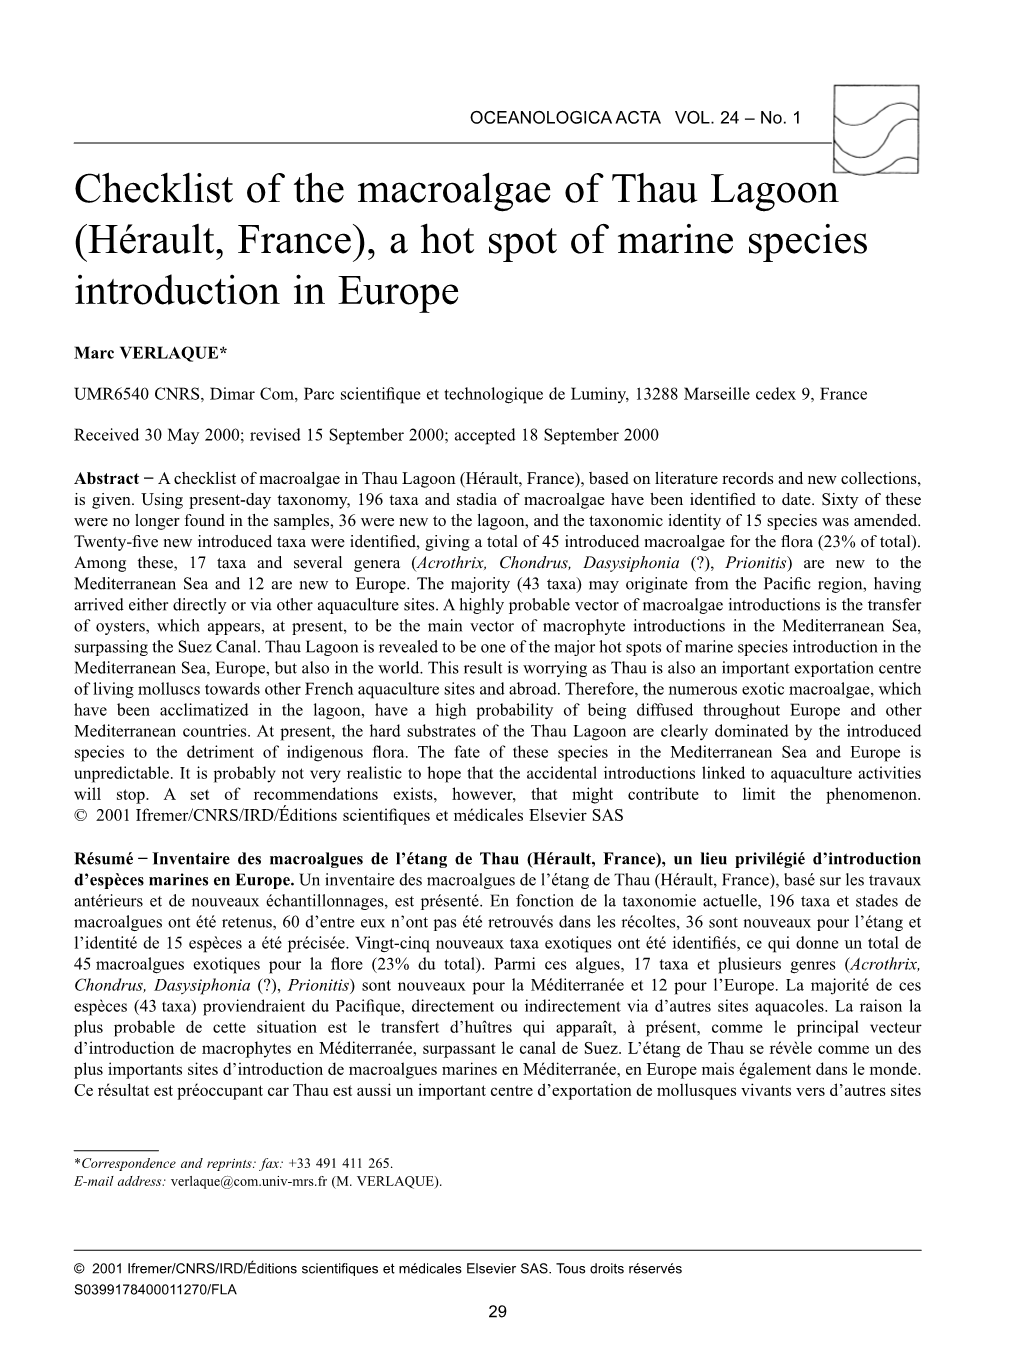 Checklist of the Macroalgae of Thau Lagoon (Hérault, France), a Hot Spot of Marine Species Introduction in Europe